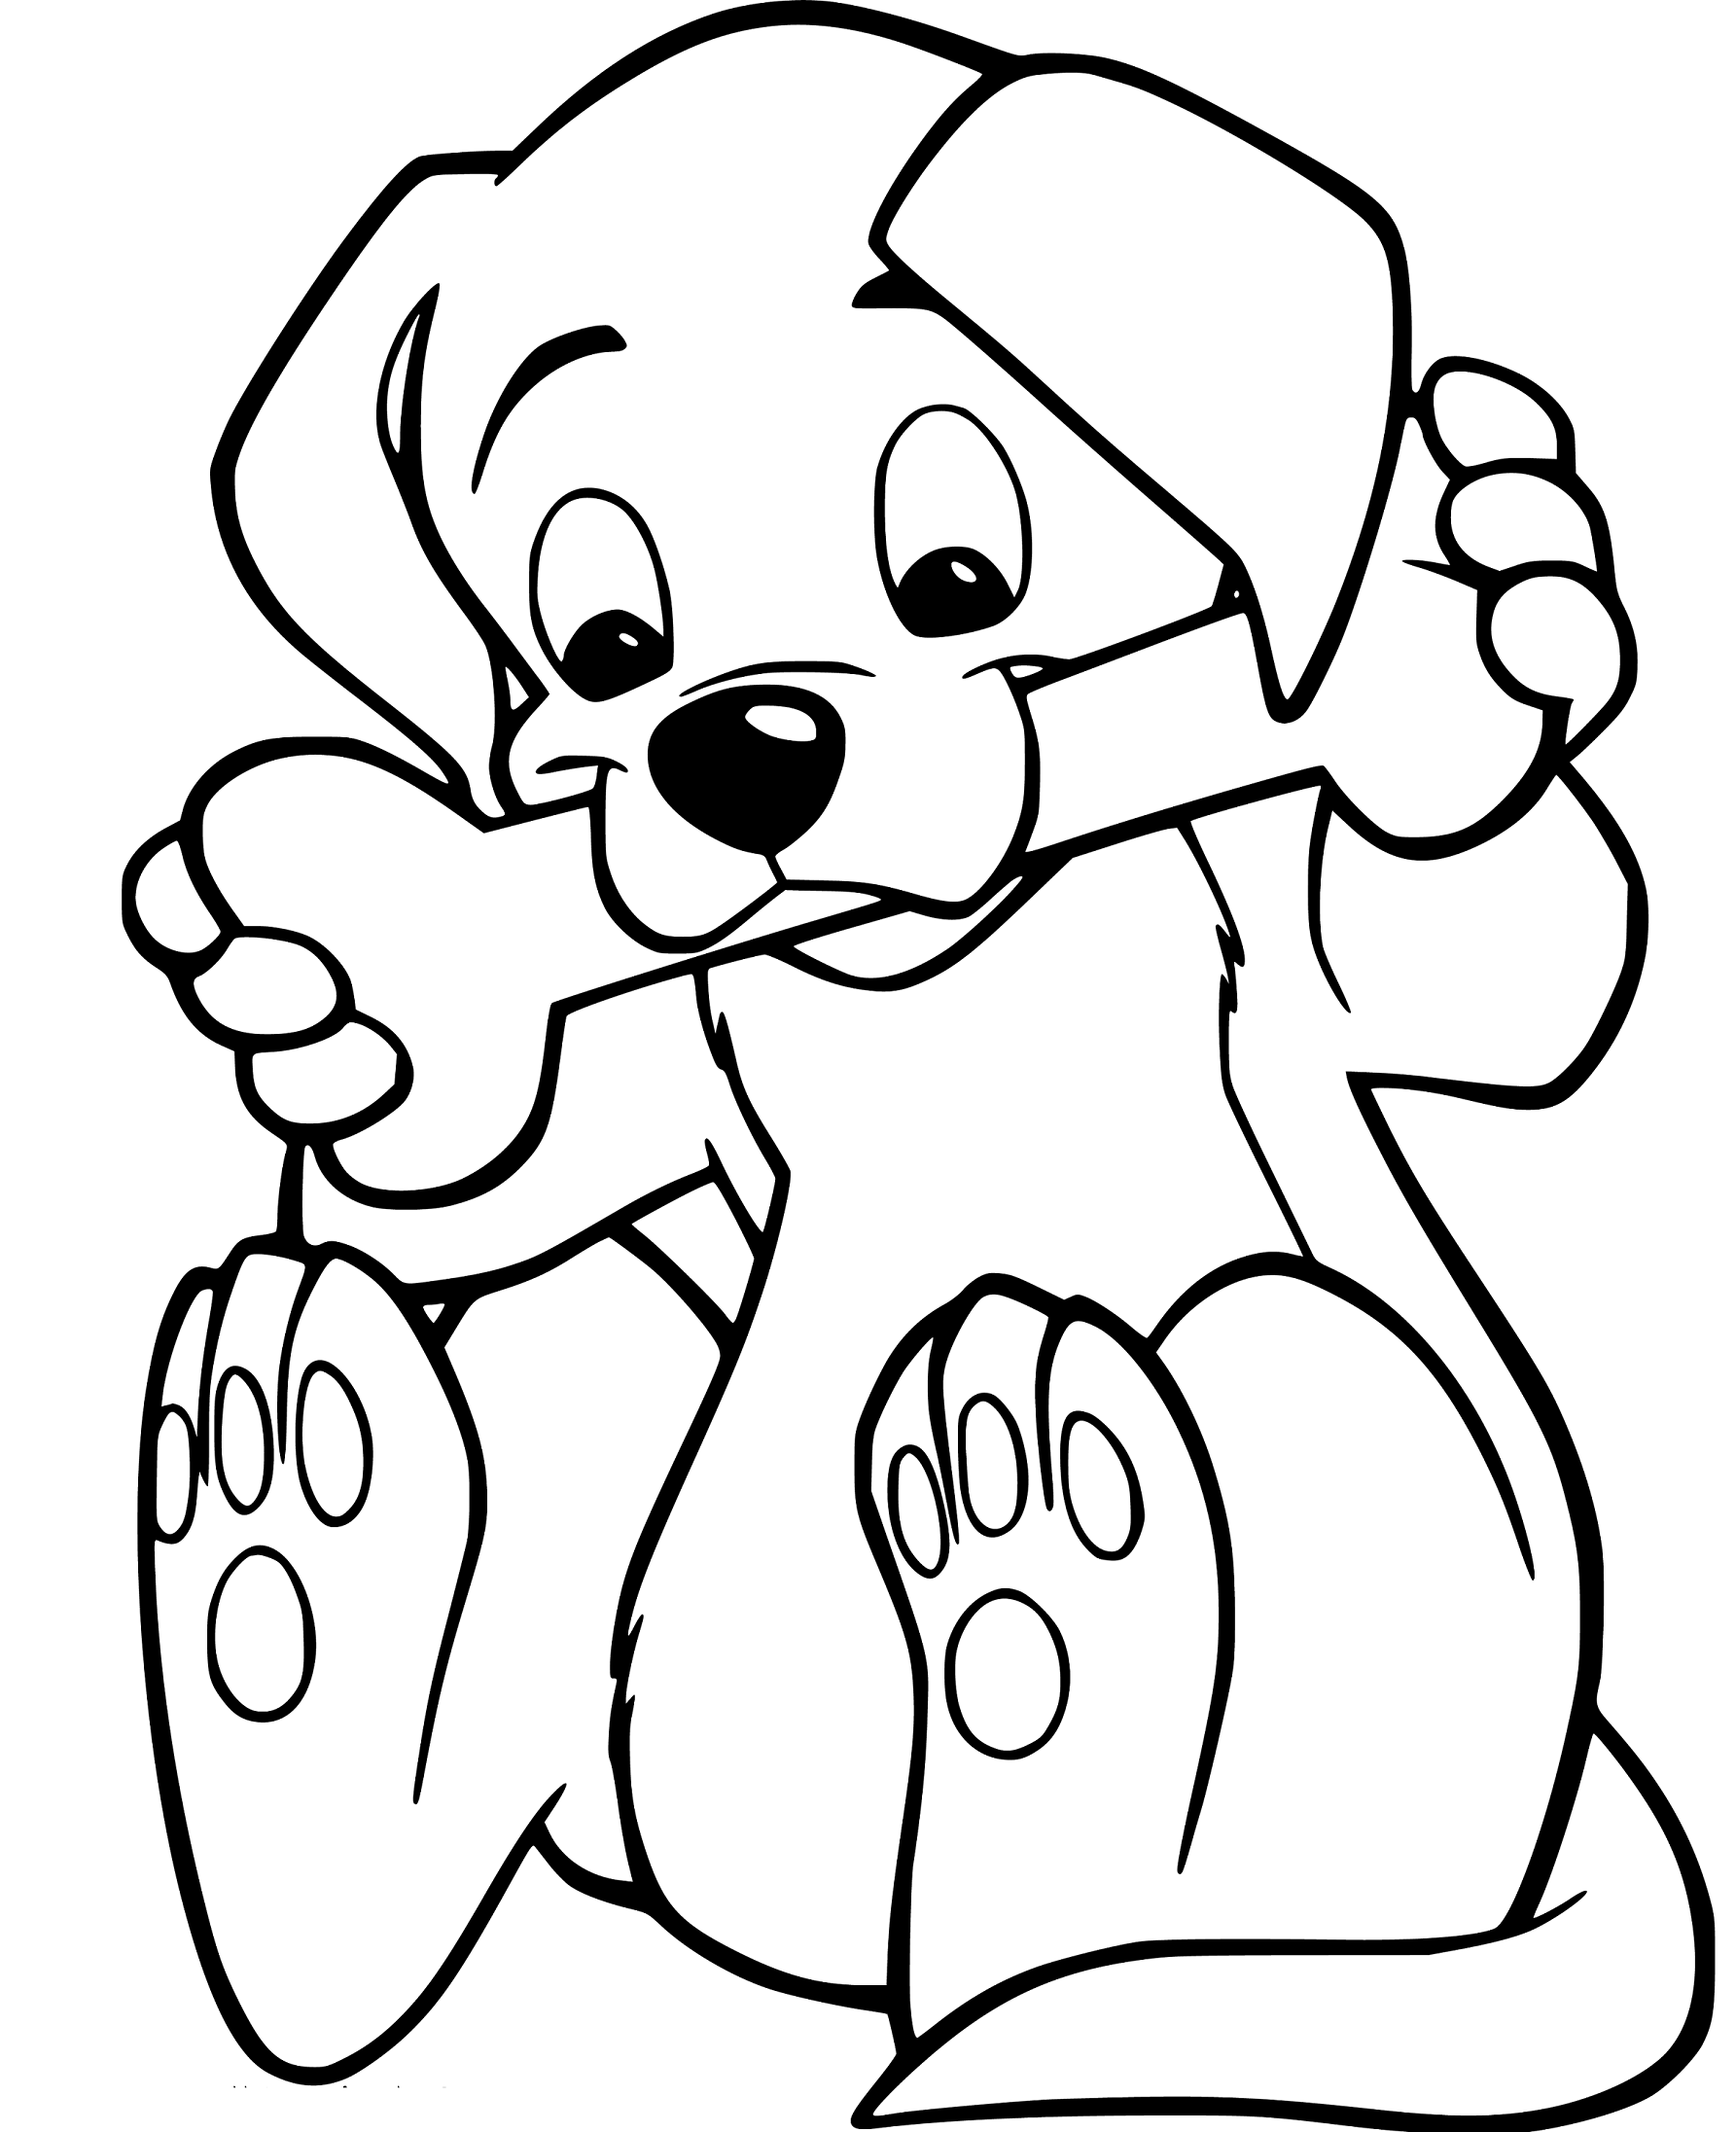 Puppy and Bone Coloring Page Easy for Children - SheetalColor.com